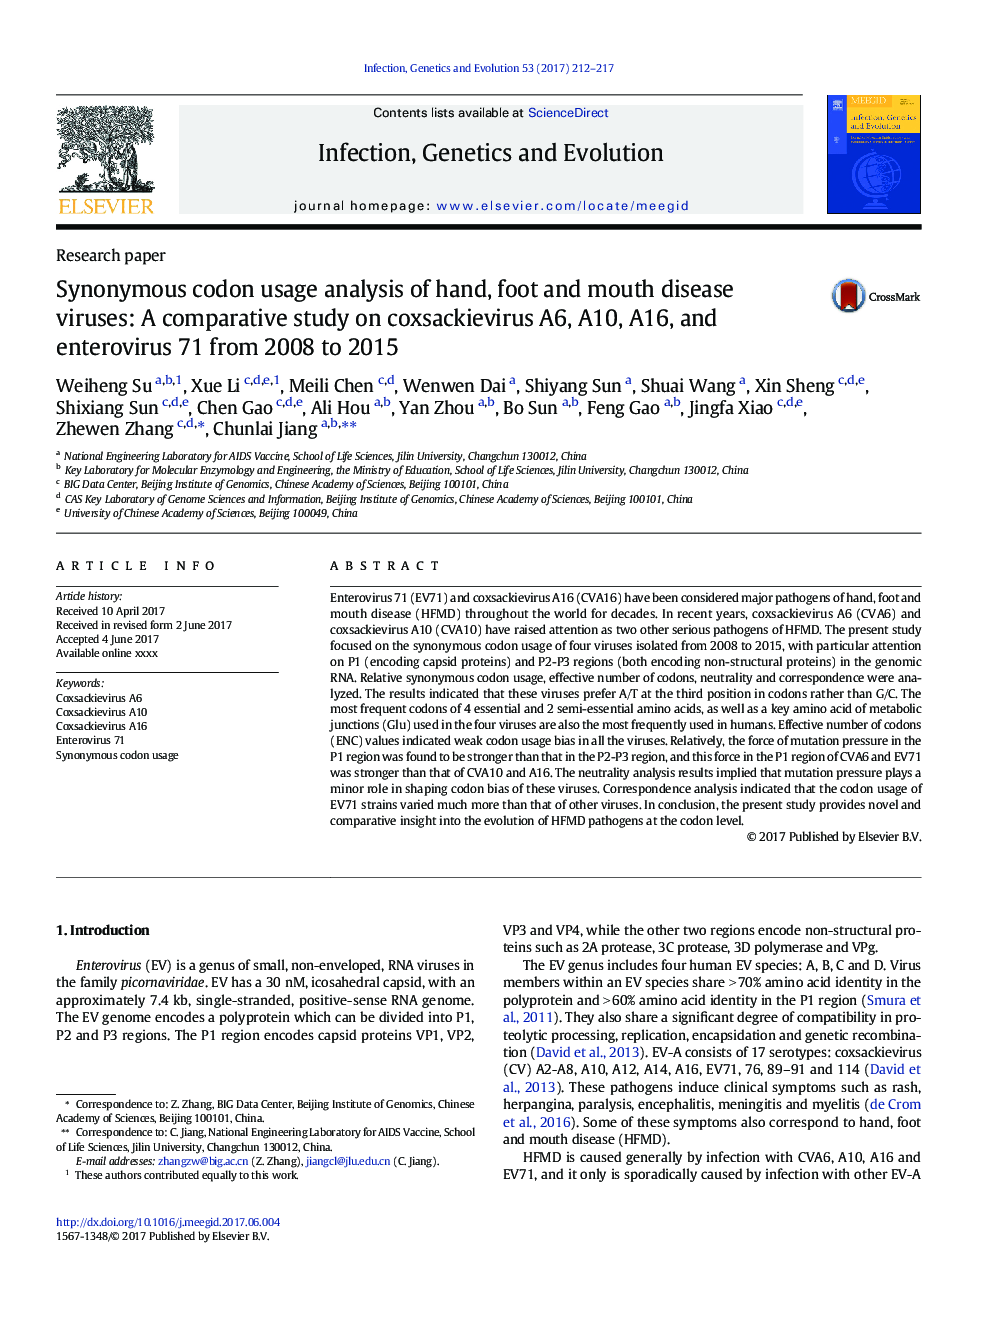 Synonymous codon usage analysis of hand, foot and mouth disease viruses: A comparative study on coxsackievirus A6, A10, A16, and enterovirus 71 from 2008 to 2015